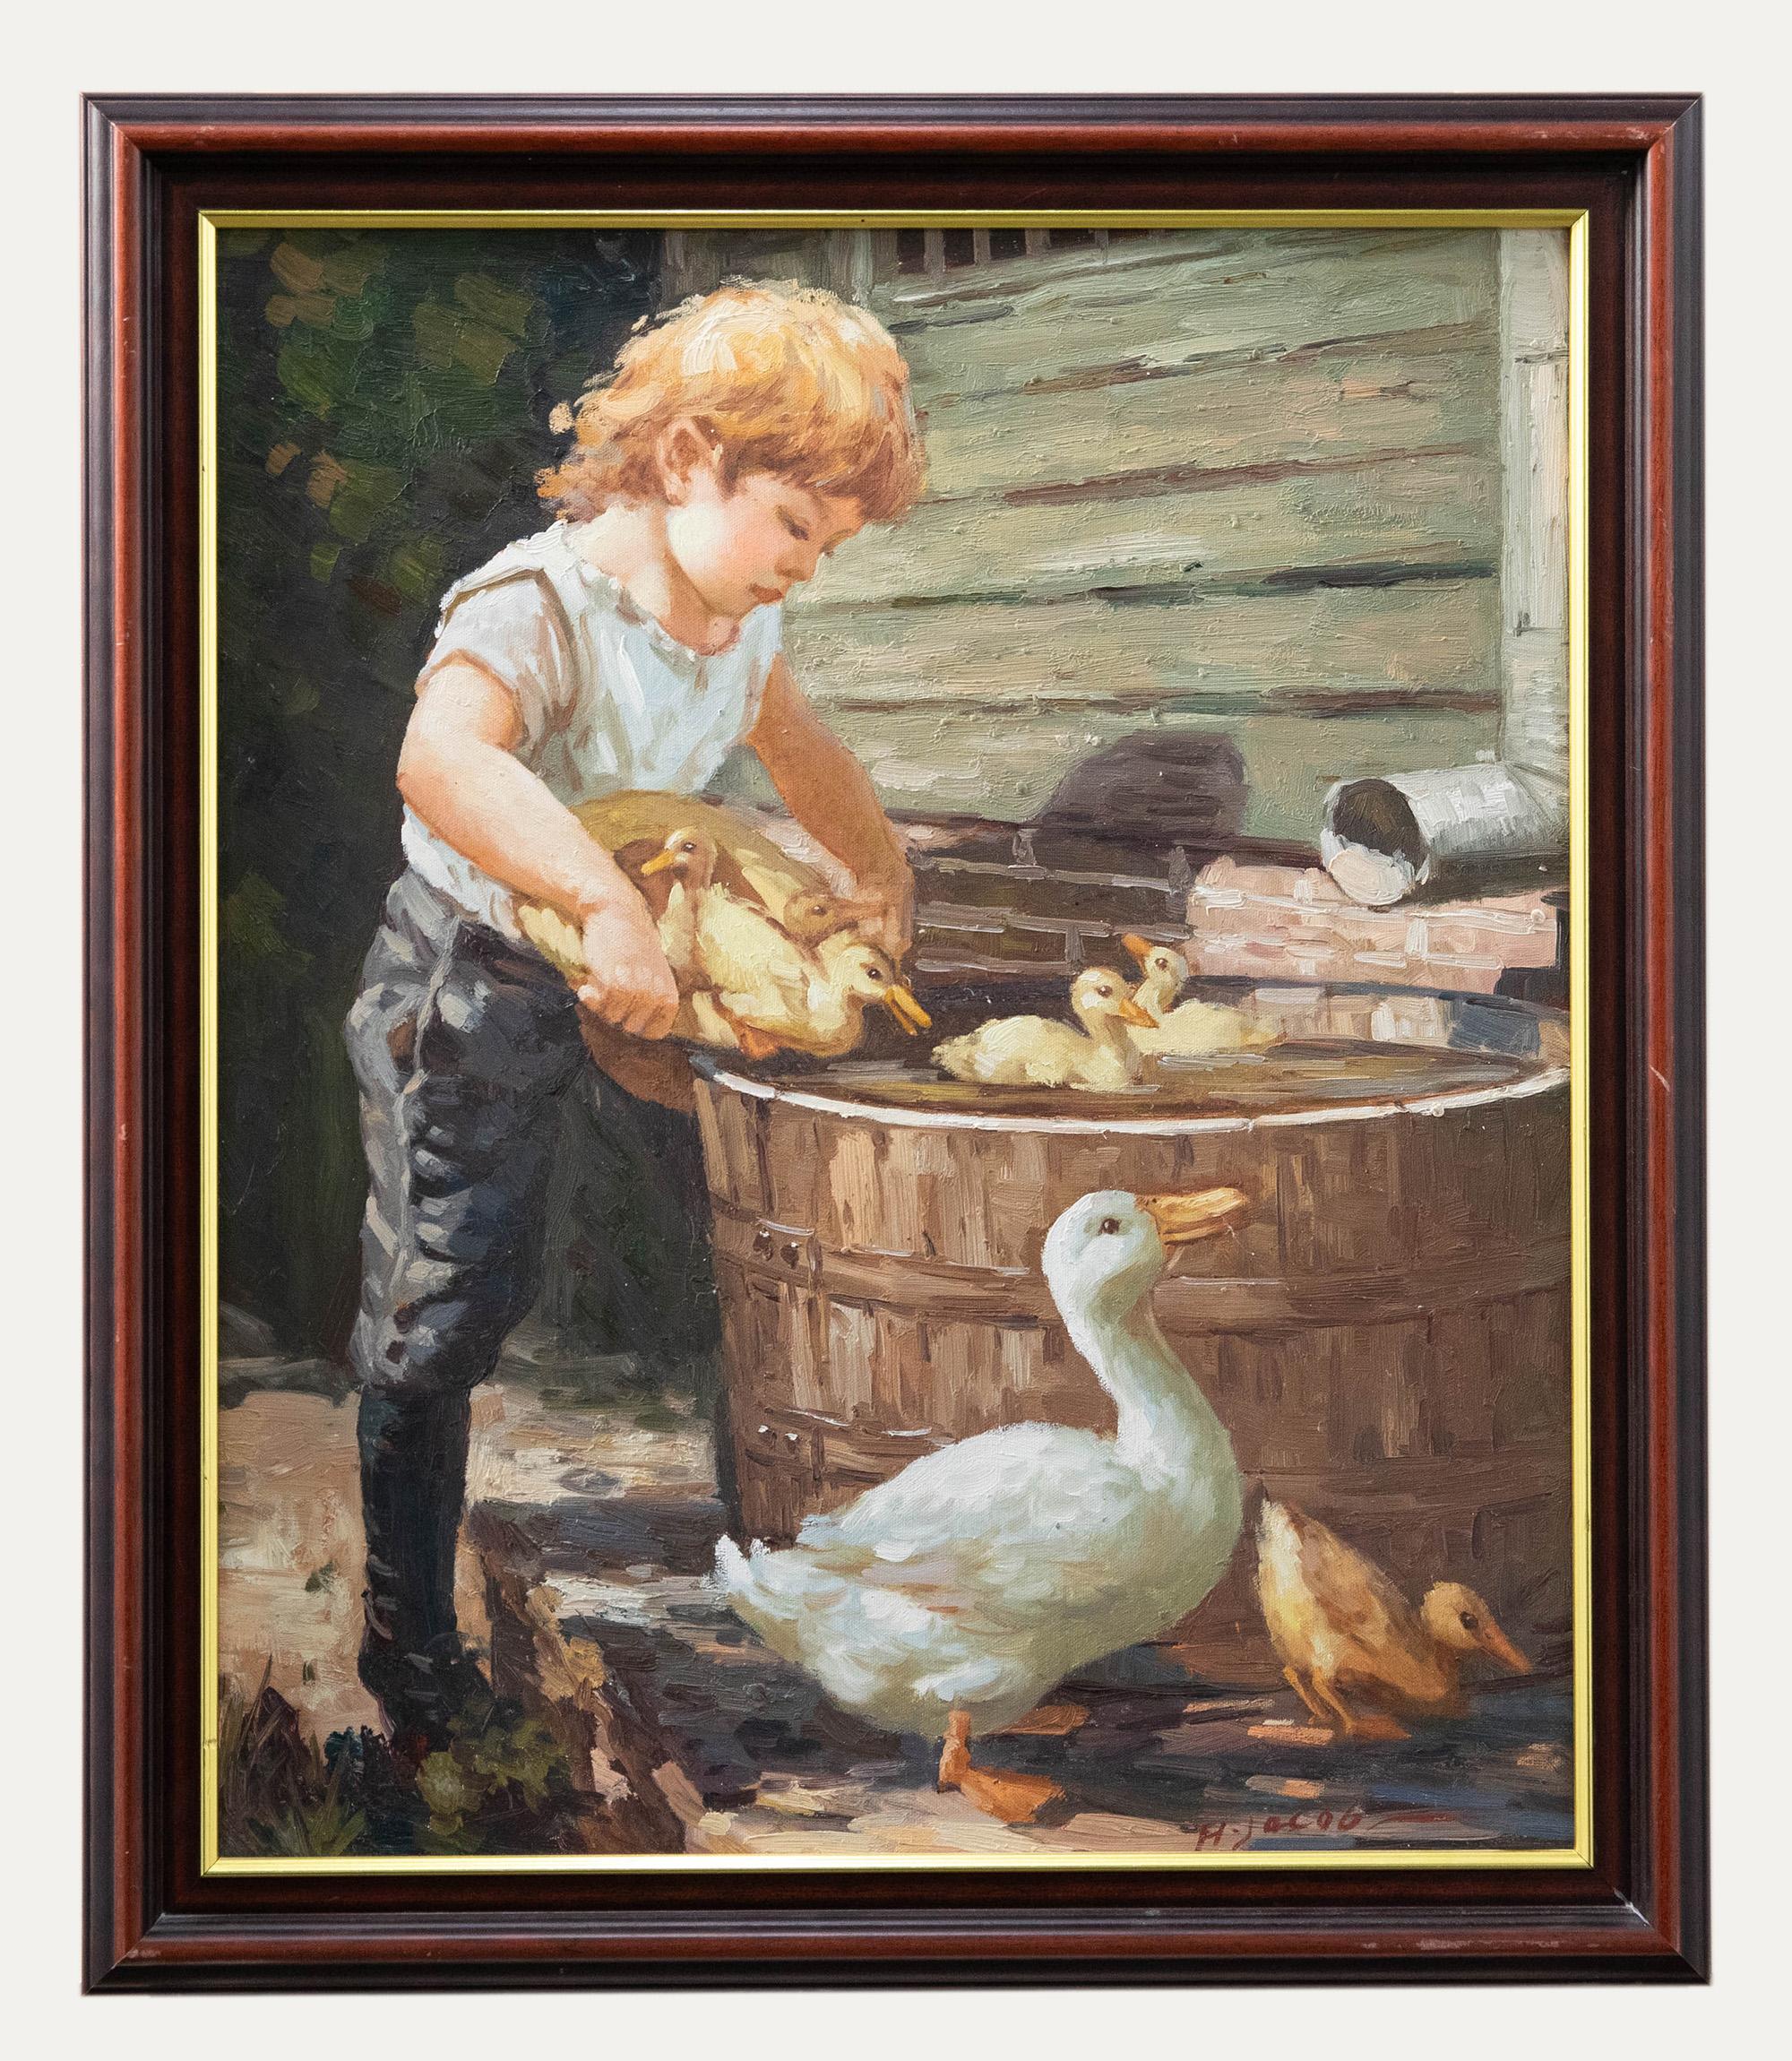 Unknown Figurative Painting - After Henry Grant Plumb - Framed Contemporary Oil, Mother's Helper